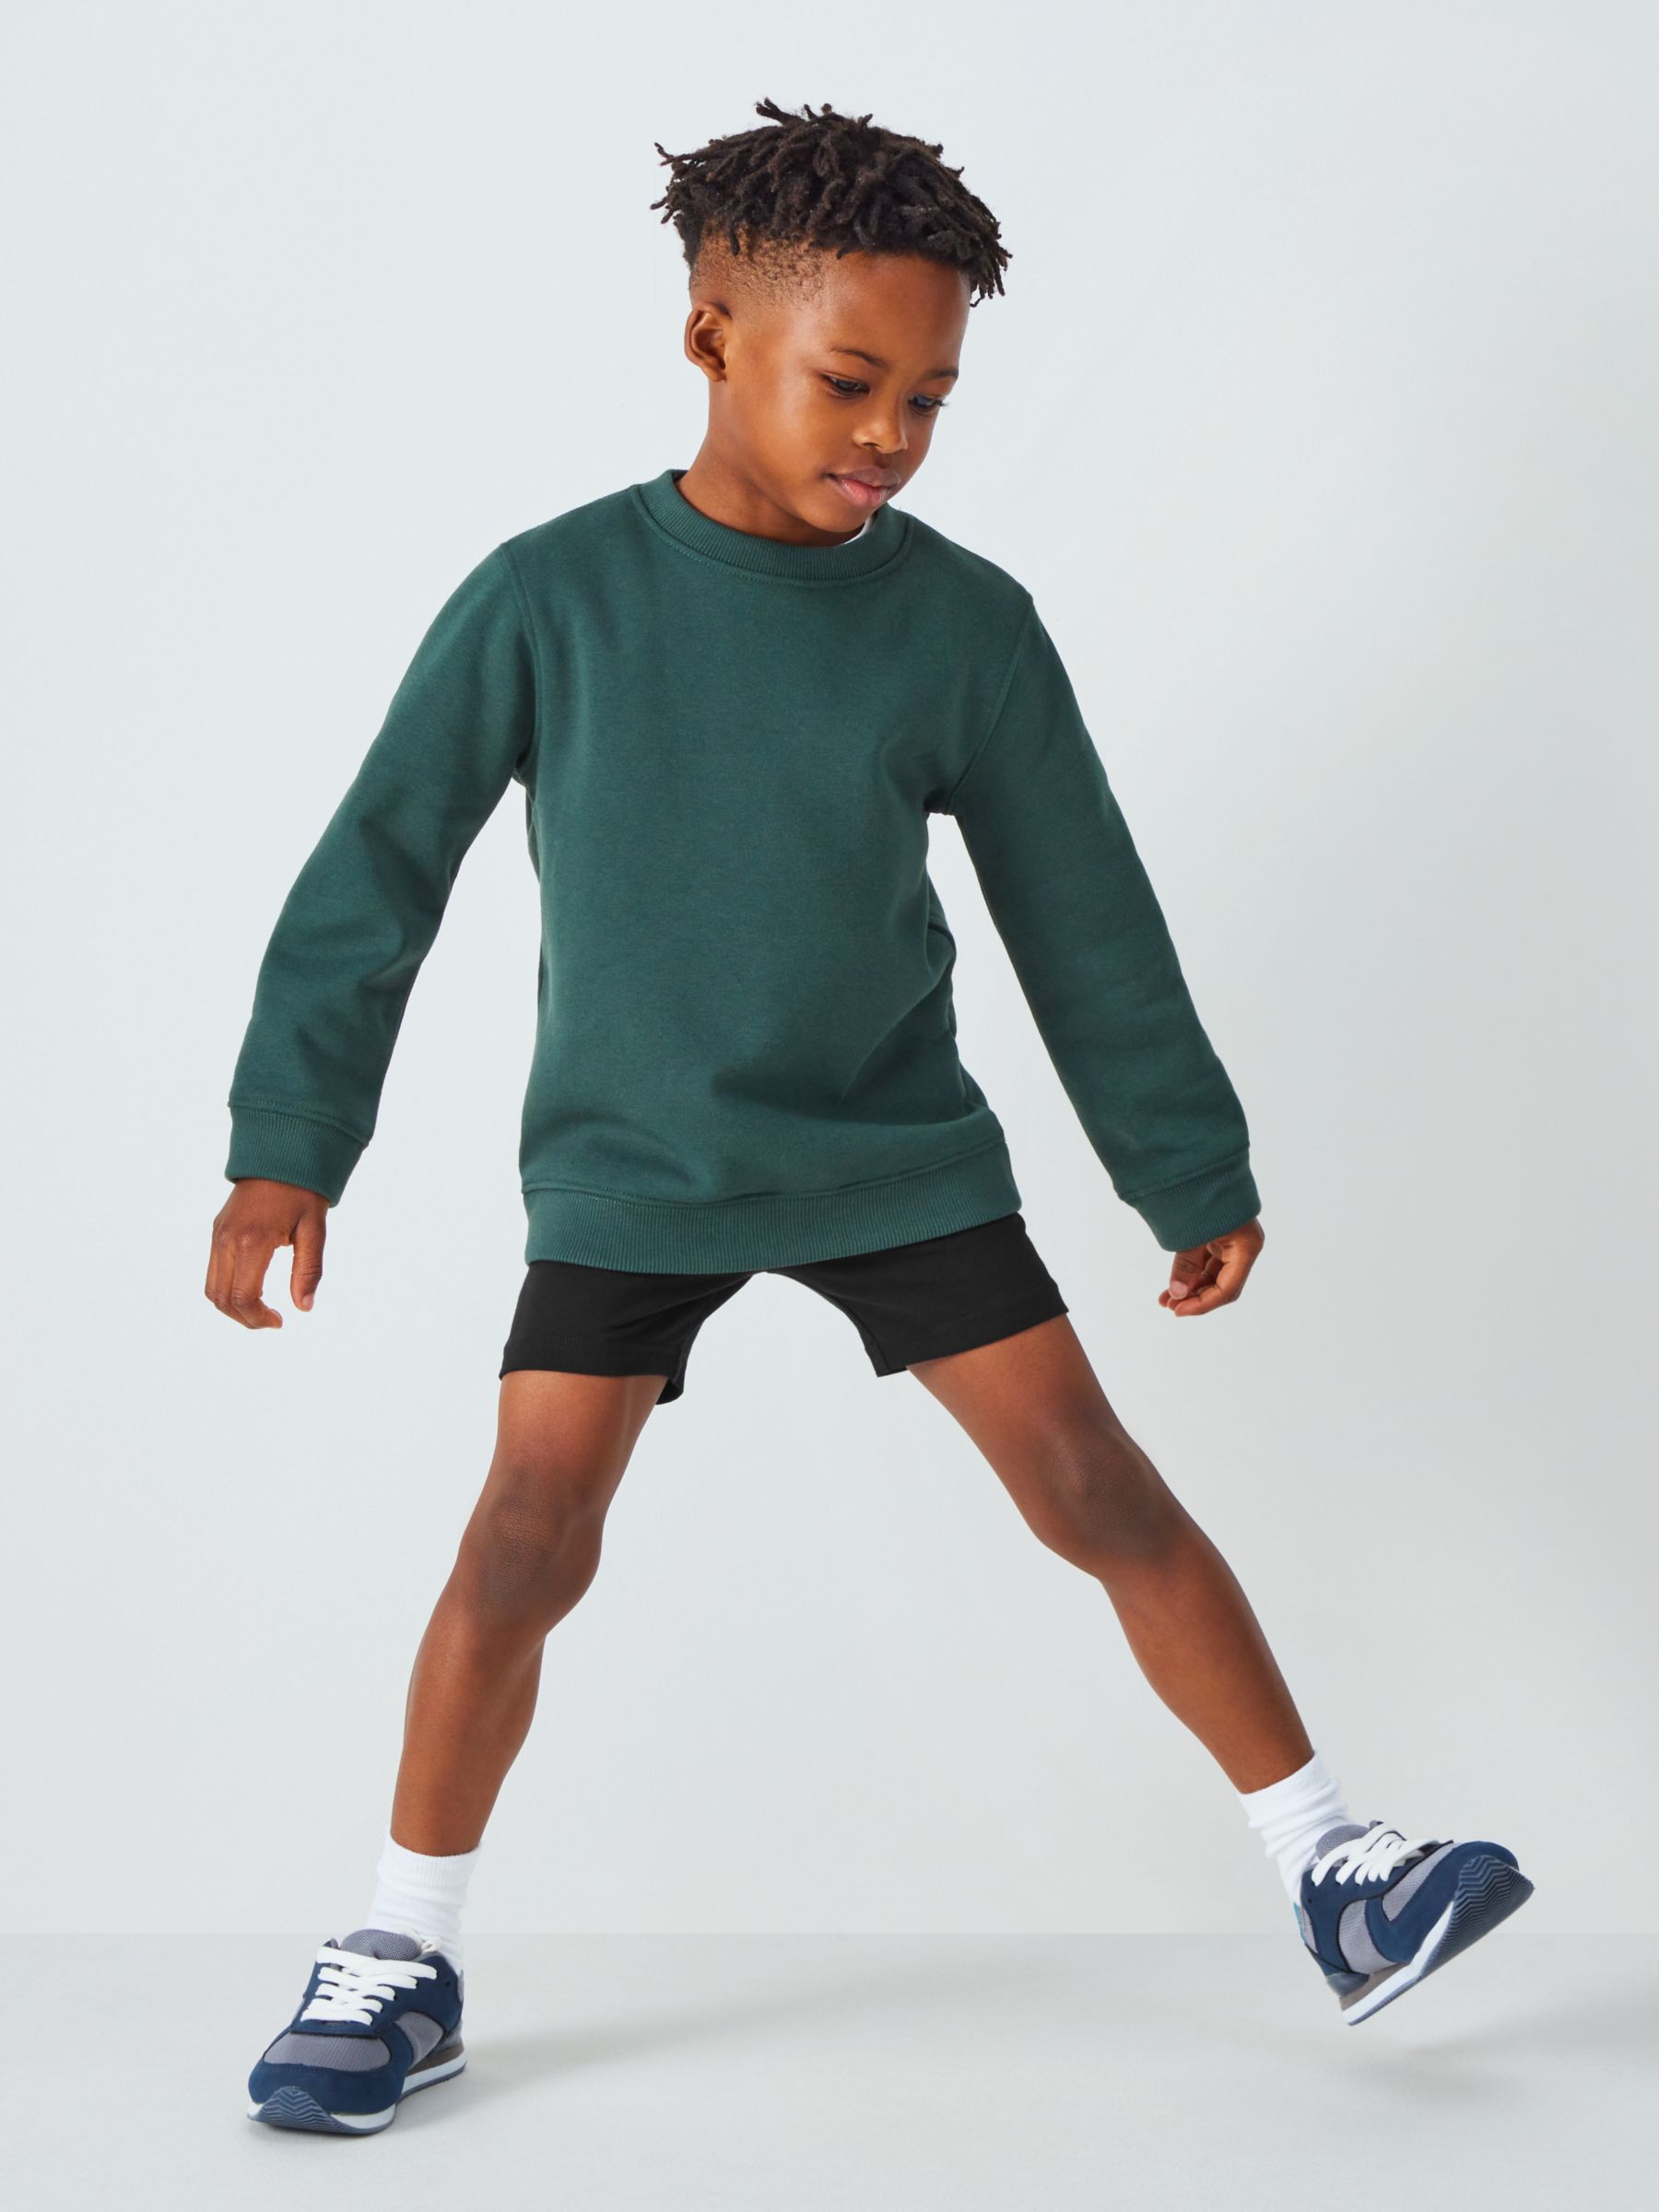 Buy John Lewis ANYDAY Kids' Cycle School Shorts, Pack of 2 Online at johnlewis.com